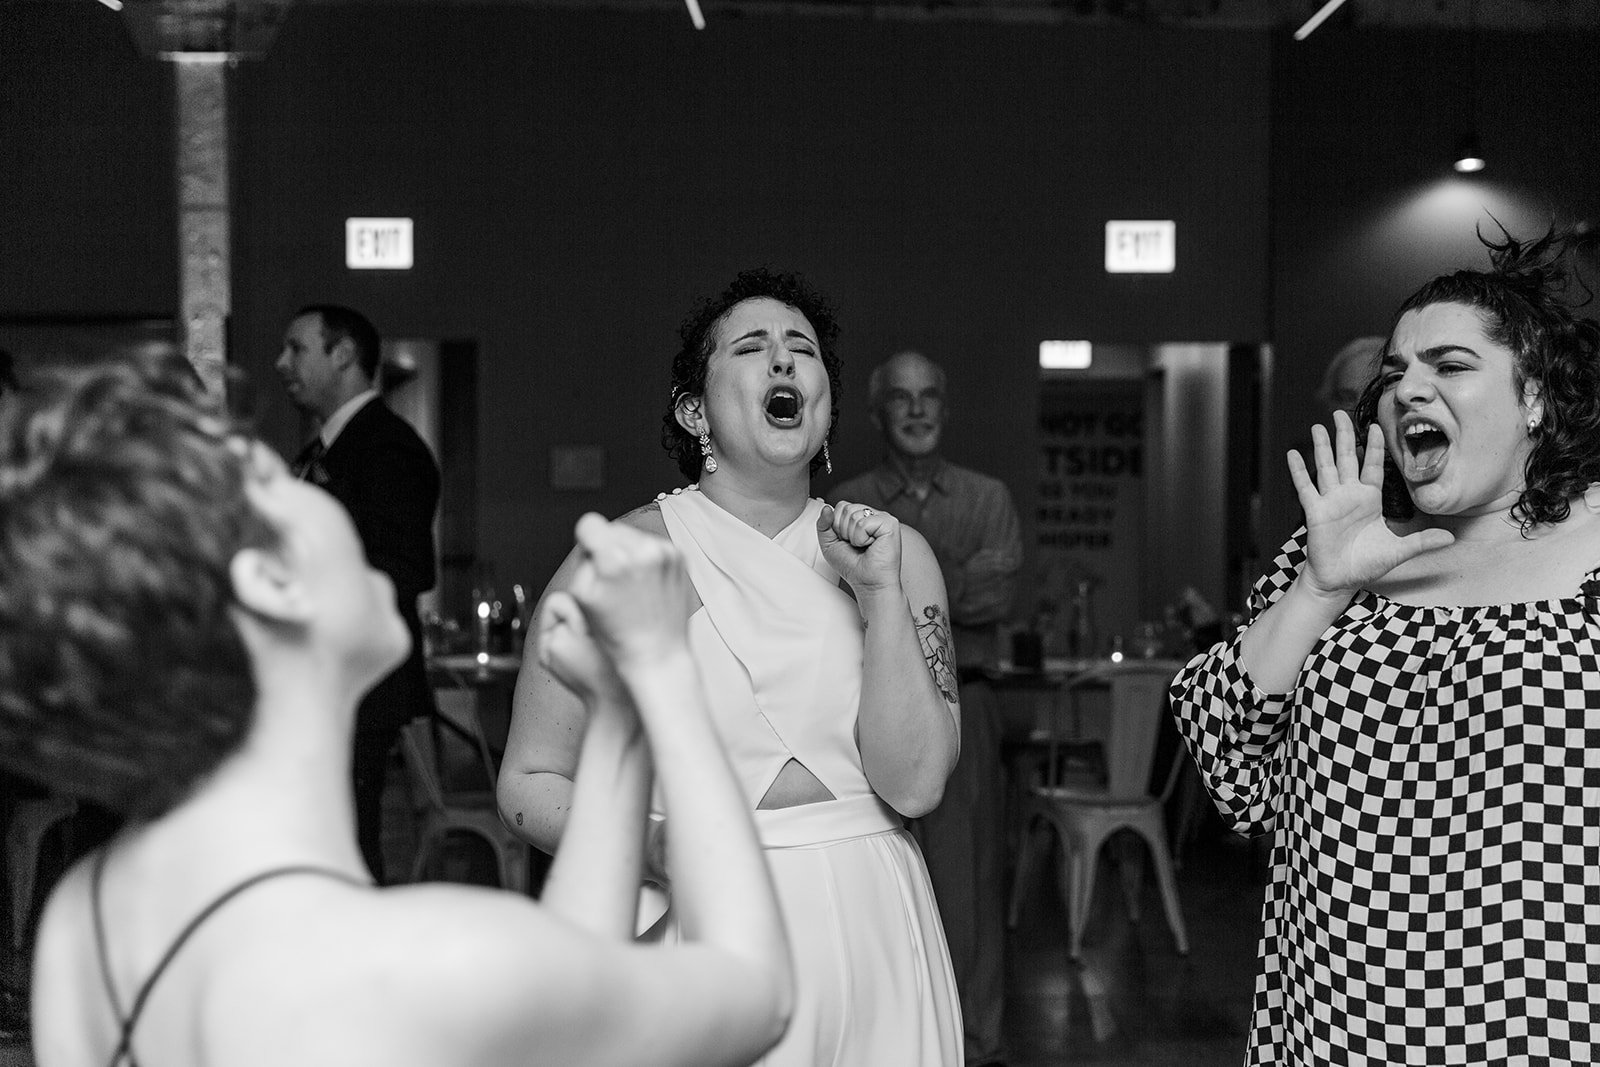  Black and white Documentary candid photo of guests dancing at nontraditional Jewish and Venezuelan wedding reception at The Joinery Chicago an Industrial loft wedding venue In Logan Square.  